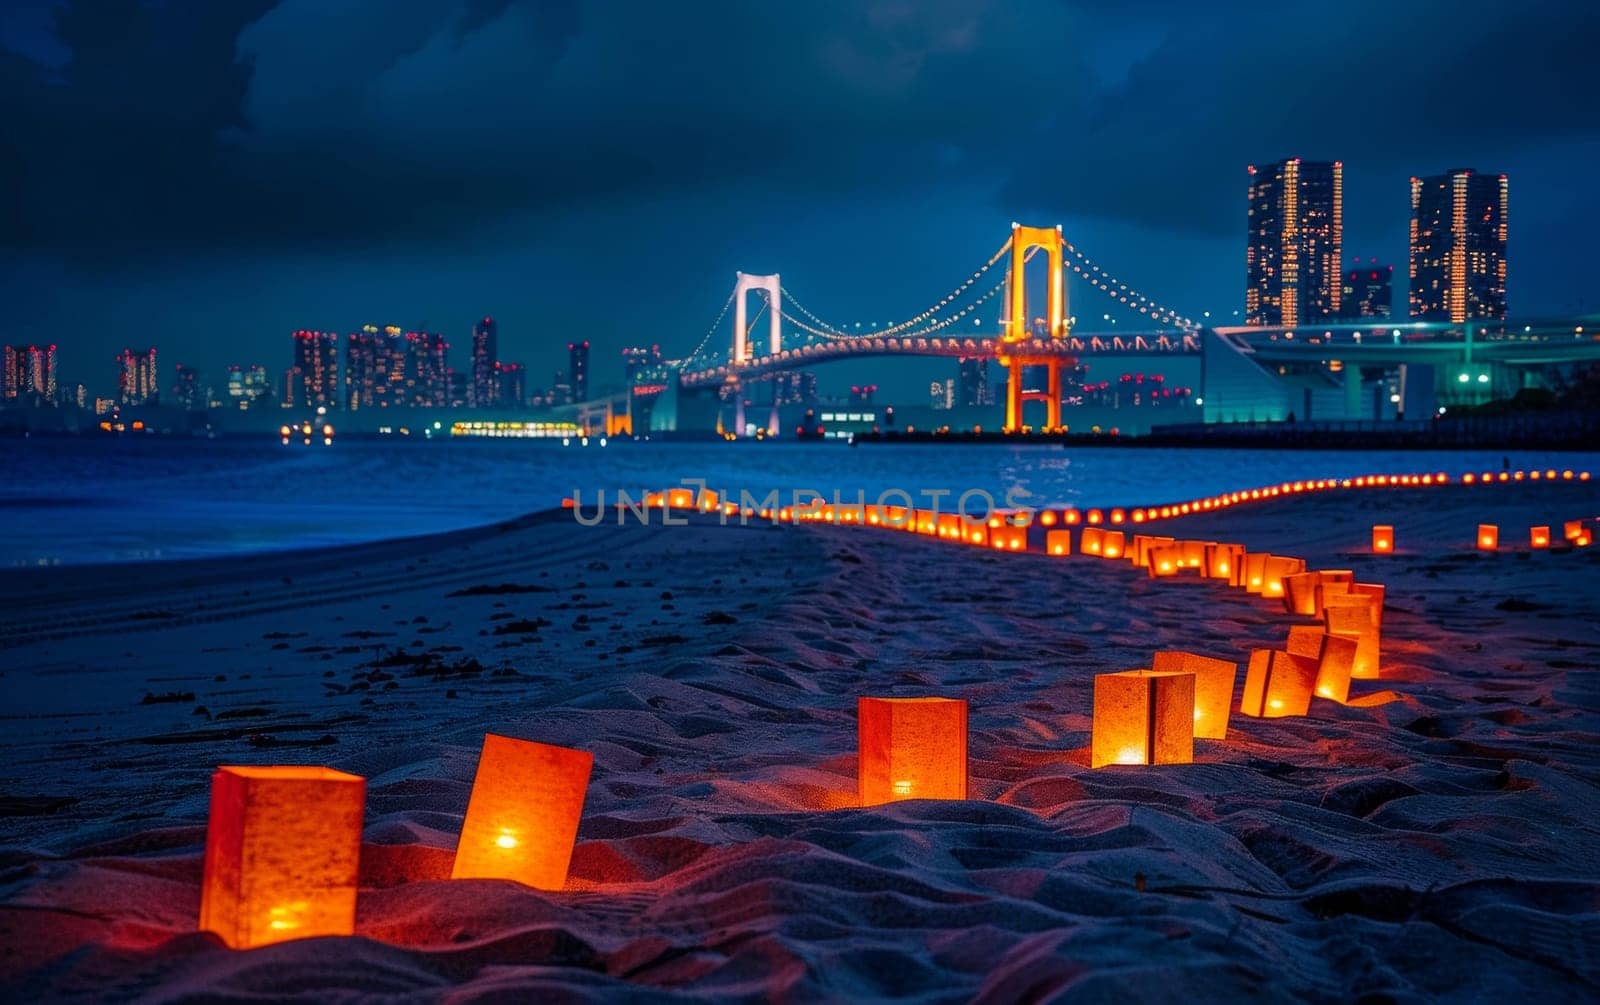 A serene beach setting at dusk, illuminated by a string of candles leading towards a brightly lit suspension bridge and city skyline. Japanese Marine Day Umi no Hi also known as Ocean Day or Sea Day.